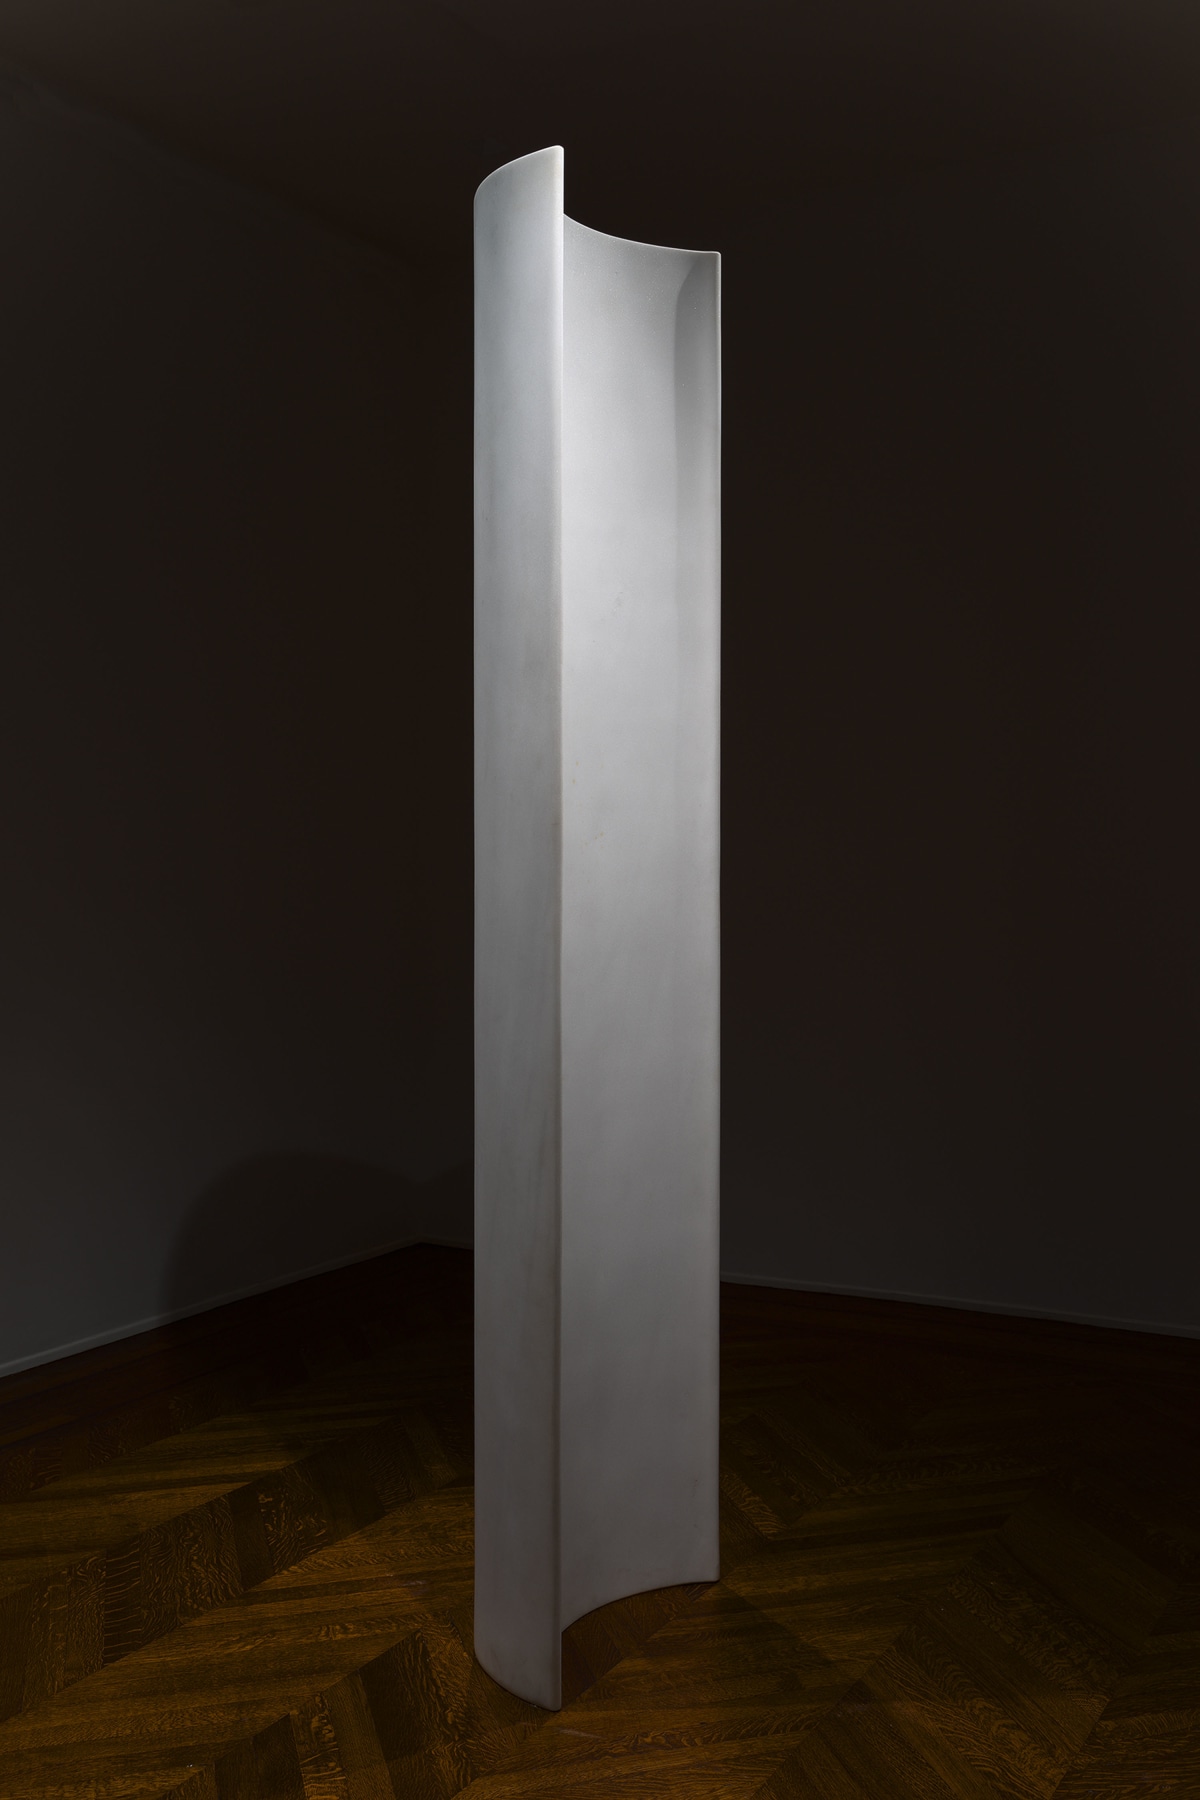 JAMES LEE BYARS, The Figure of Death and The Moon Column, New York, 2015, Installation Image 7